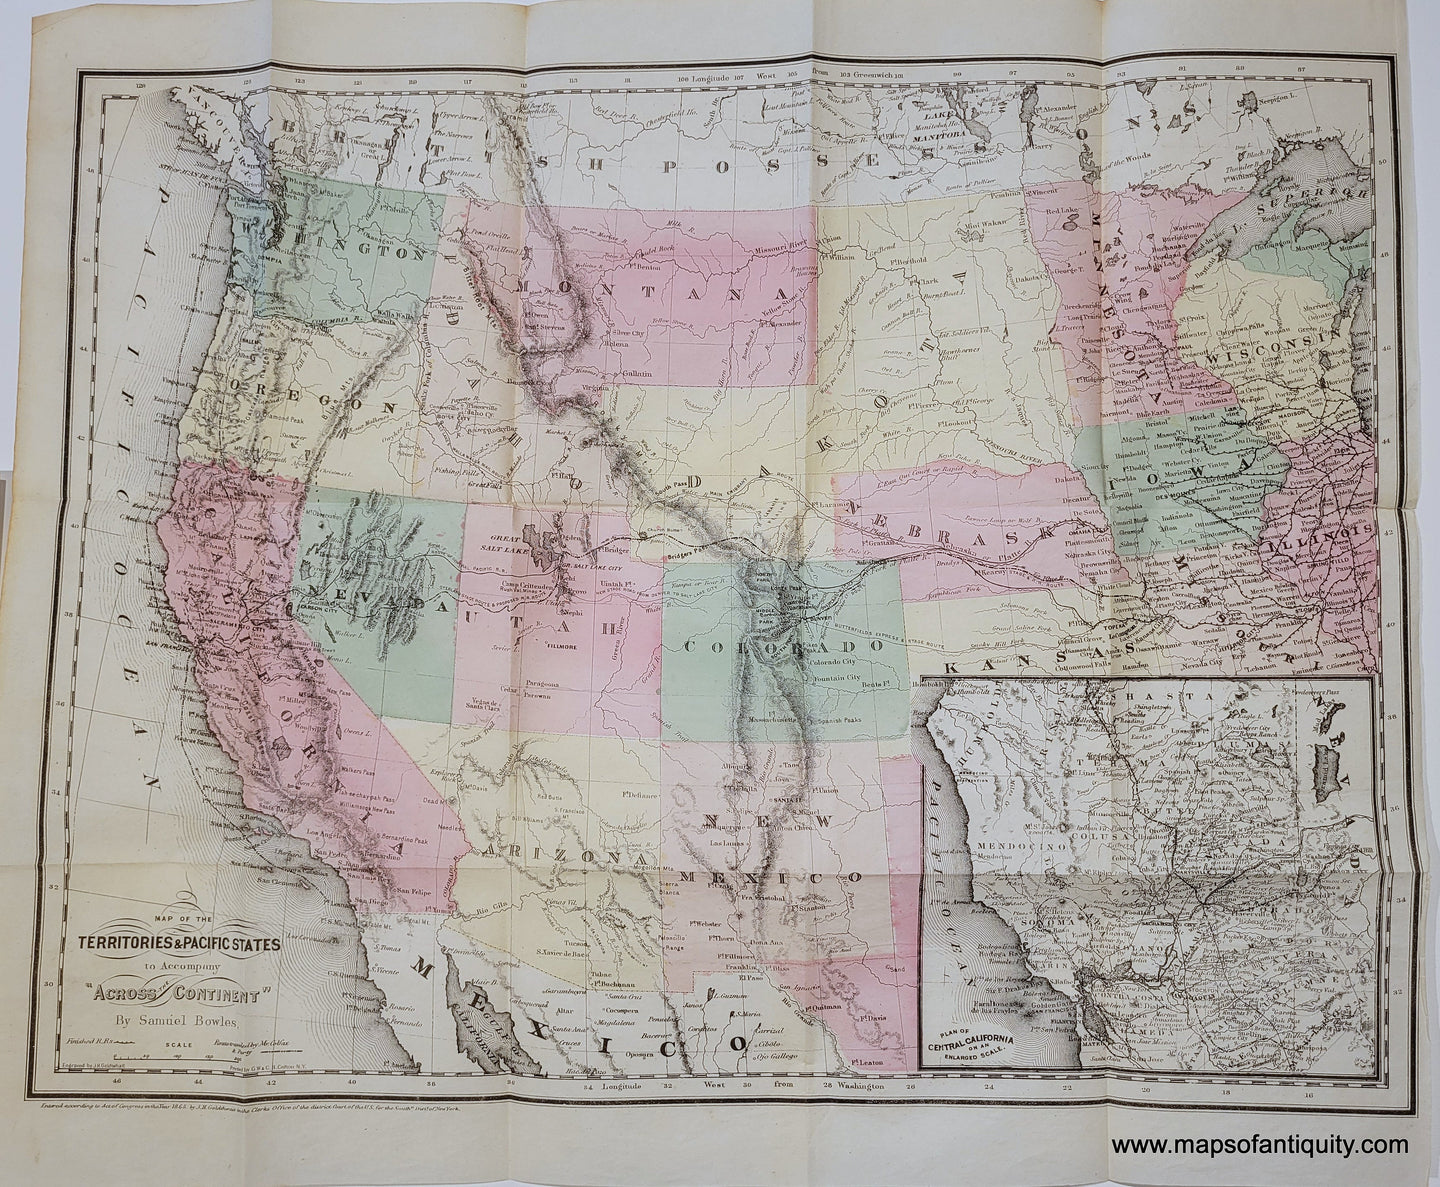 Genuine-Antique-Map-Map-of-the-Territories-Pacific-States-to-Accompany-Across-the-Continent-by-Samuel-Bowles-1865-Colton-Maps-Of-Antiquity